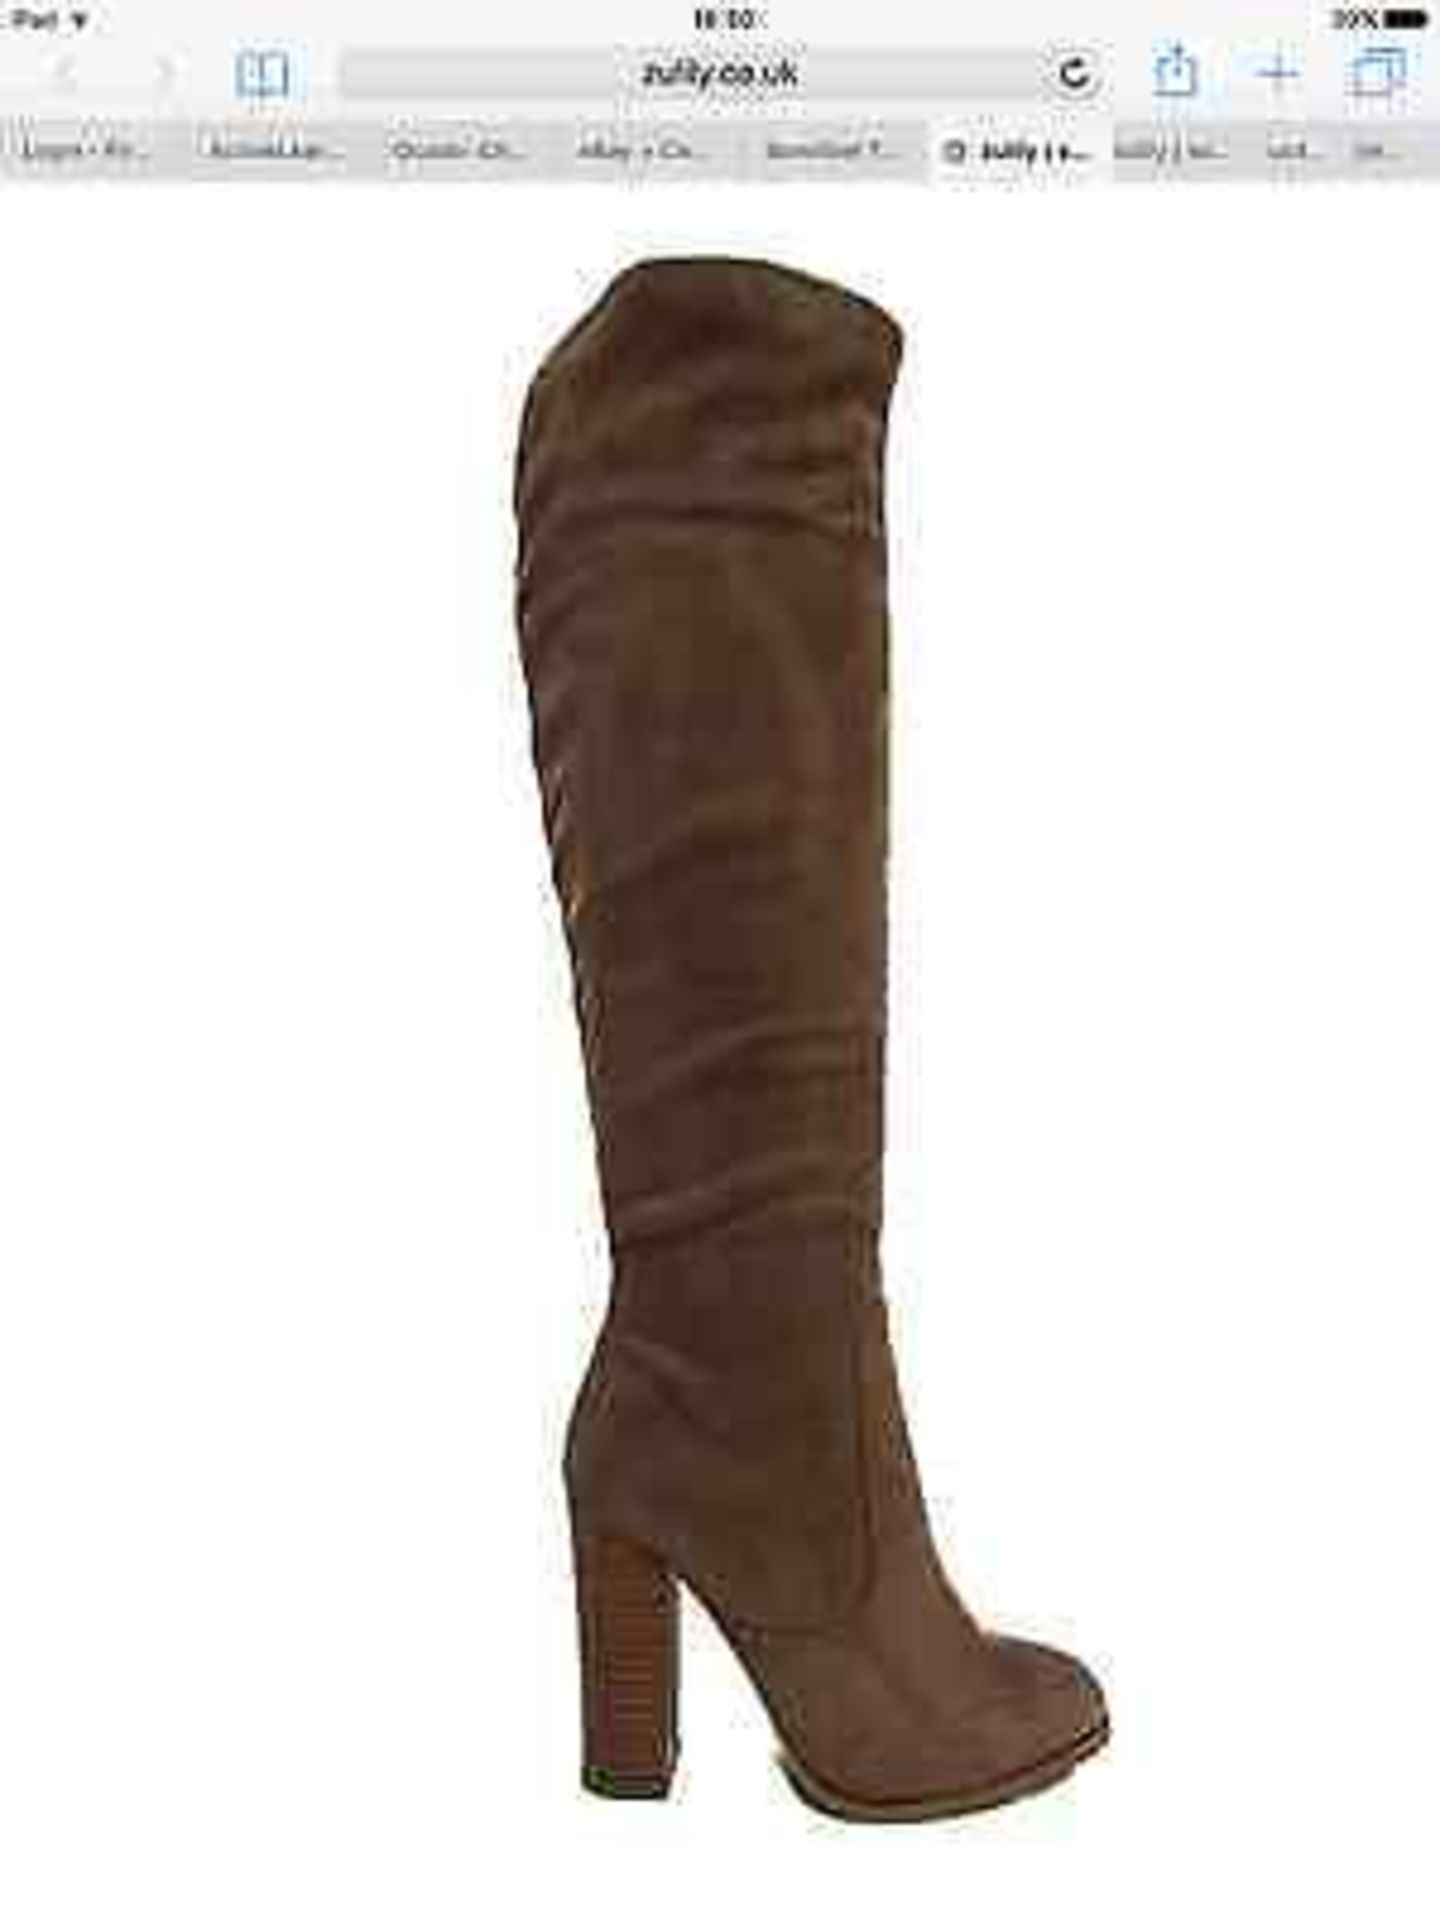 X2B Taupe Baina Boot, Size 6.5-7 (New with box) [Ref: 41703523- G-003]